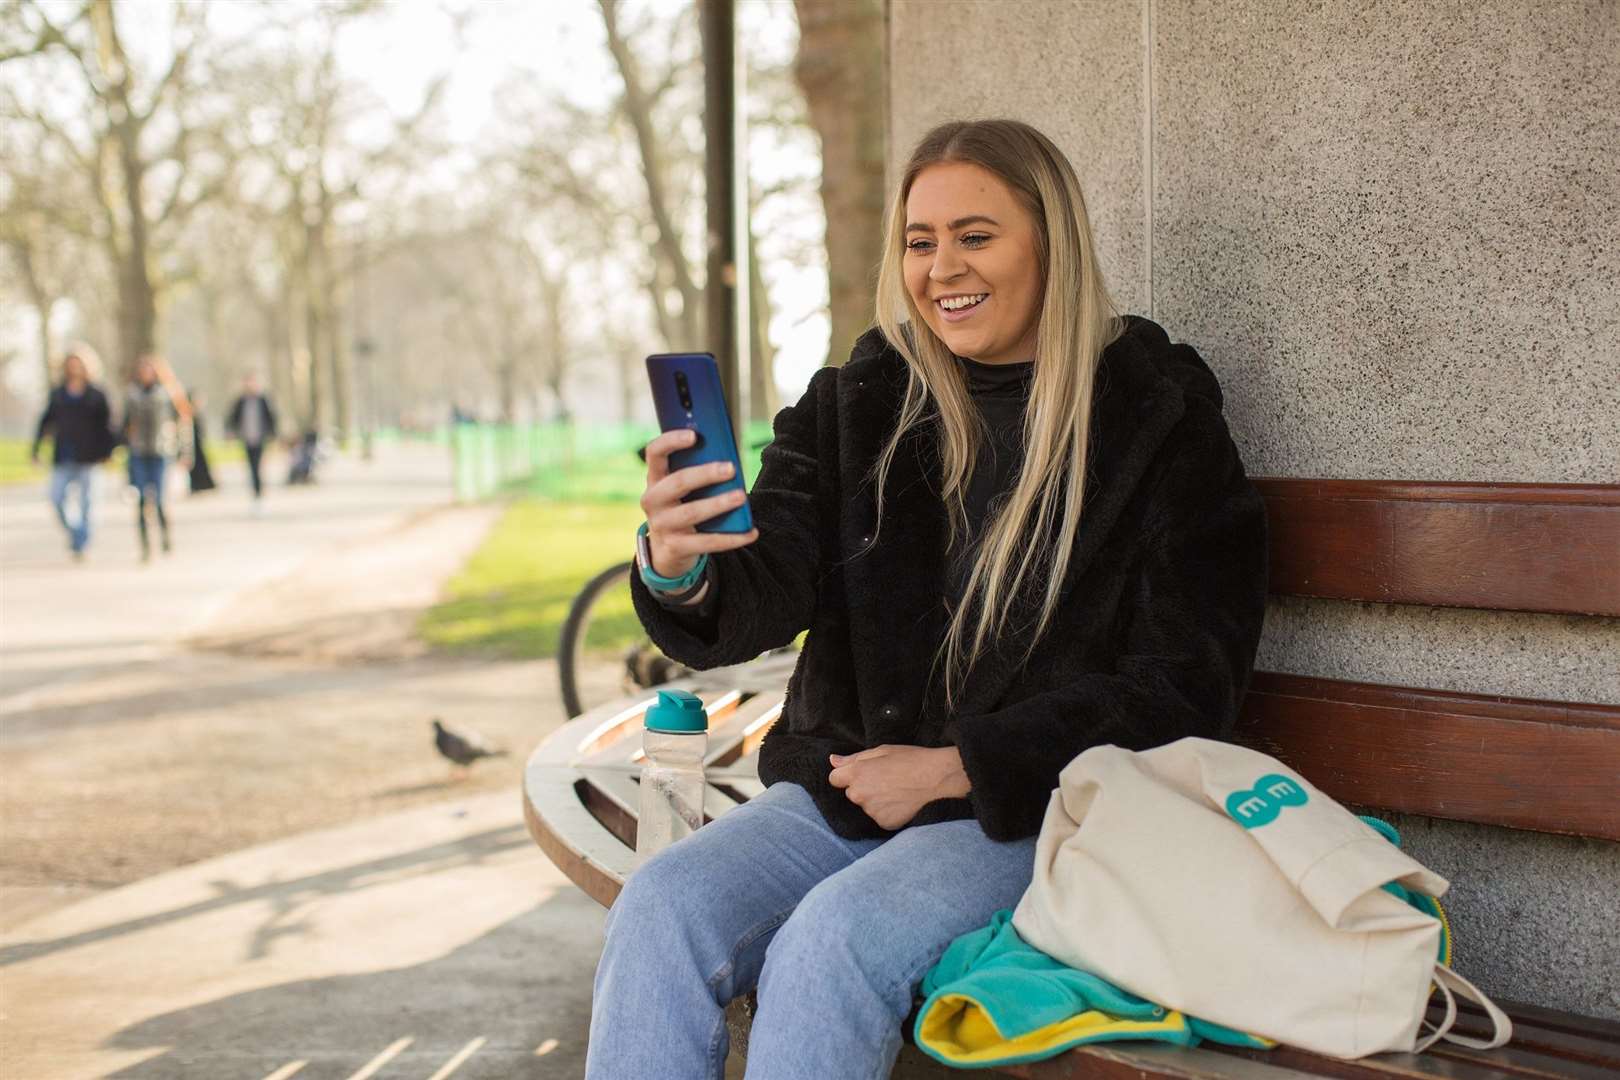 5G will make it easier to stream content and make video calls on the move. Picture: Dan Wong Photography